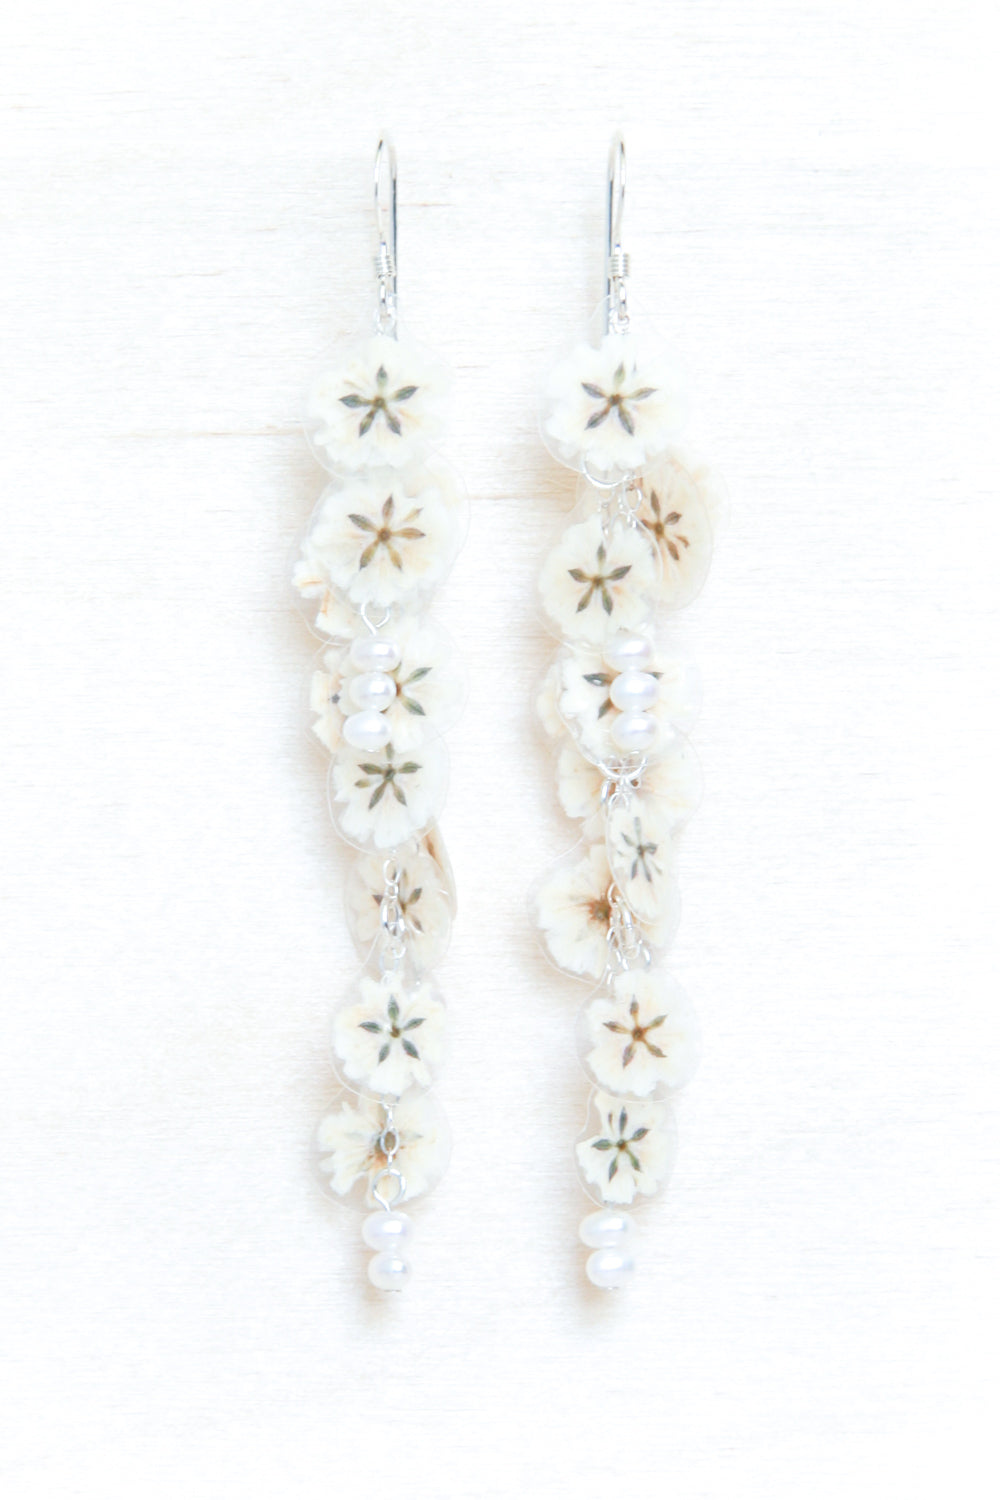 White Baby's Breath Floral Bridal Earrings with Freshwater Pearls--Custom Available